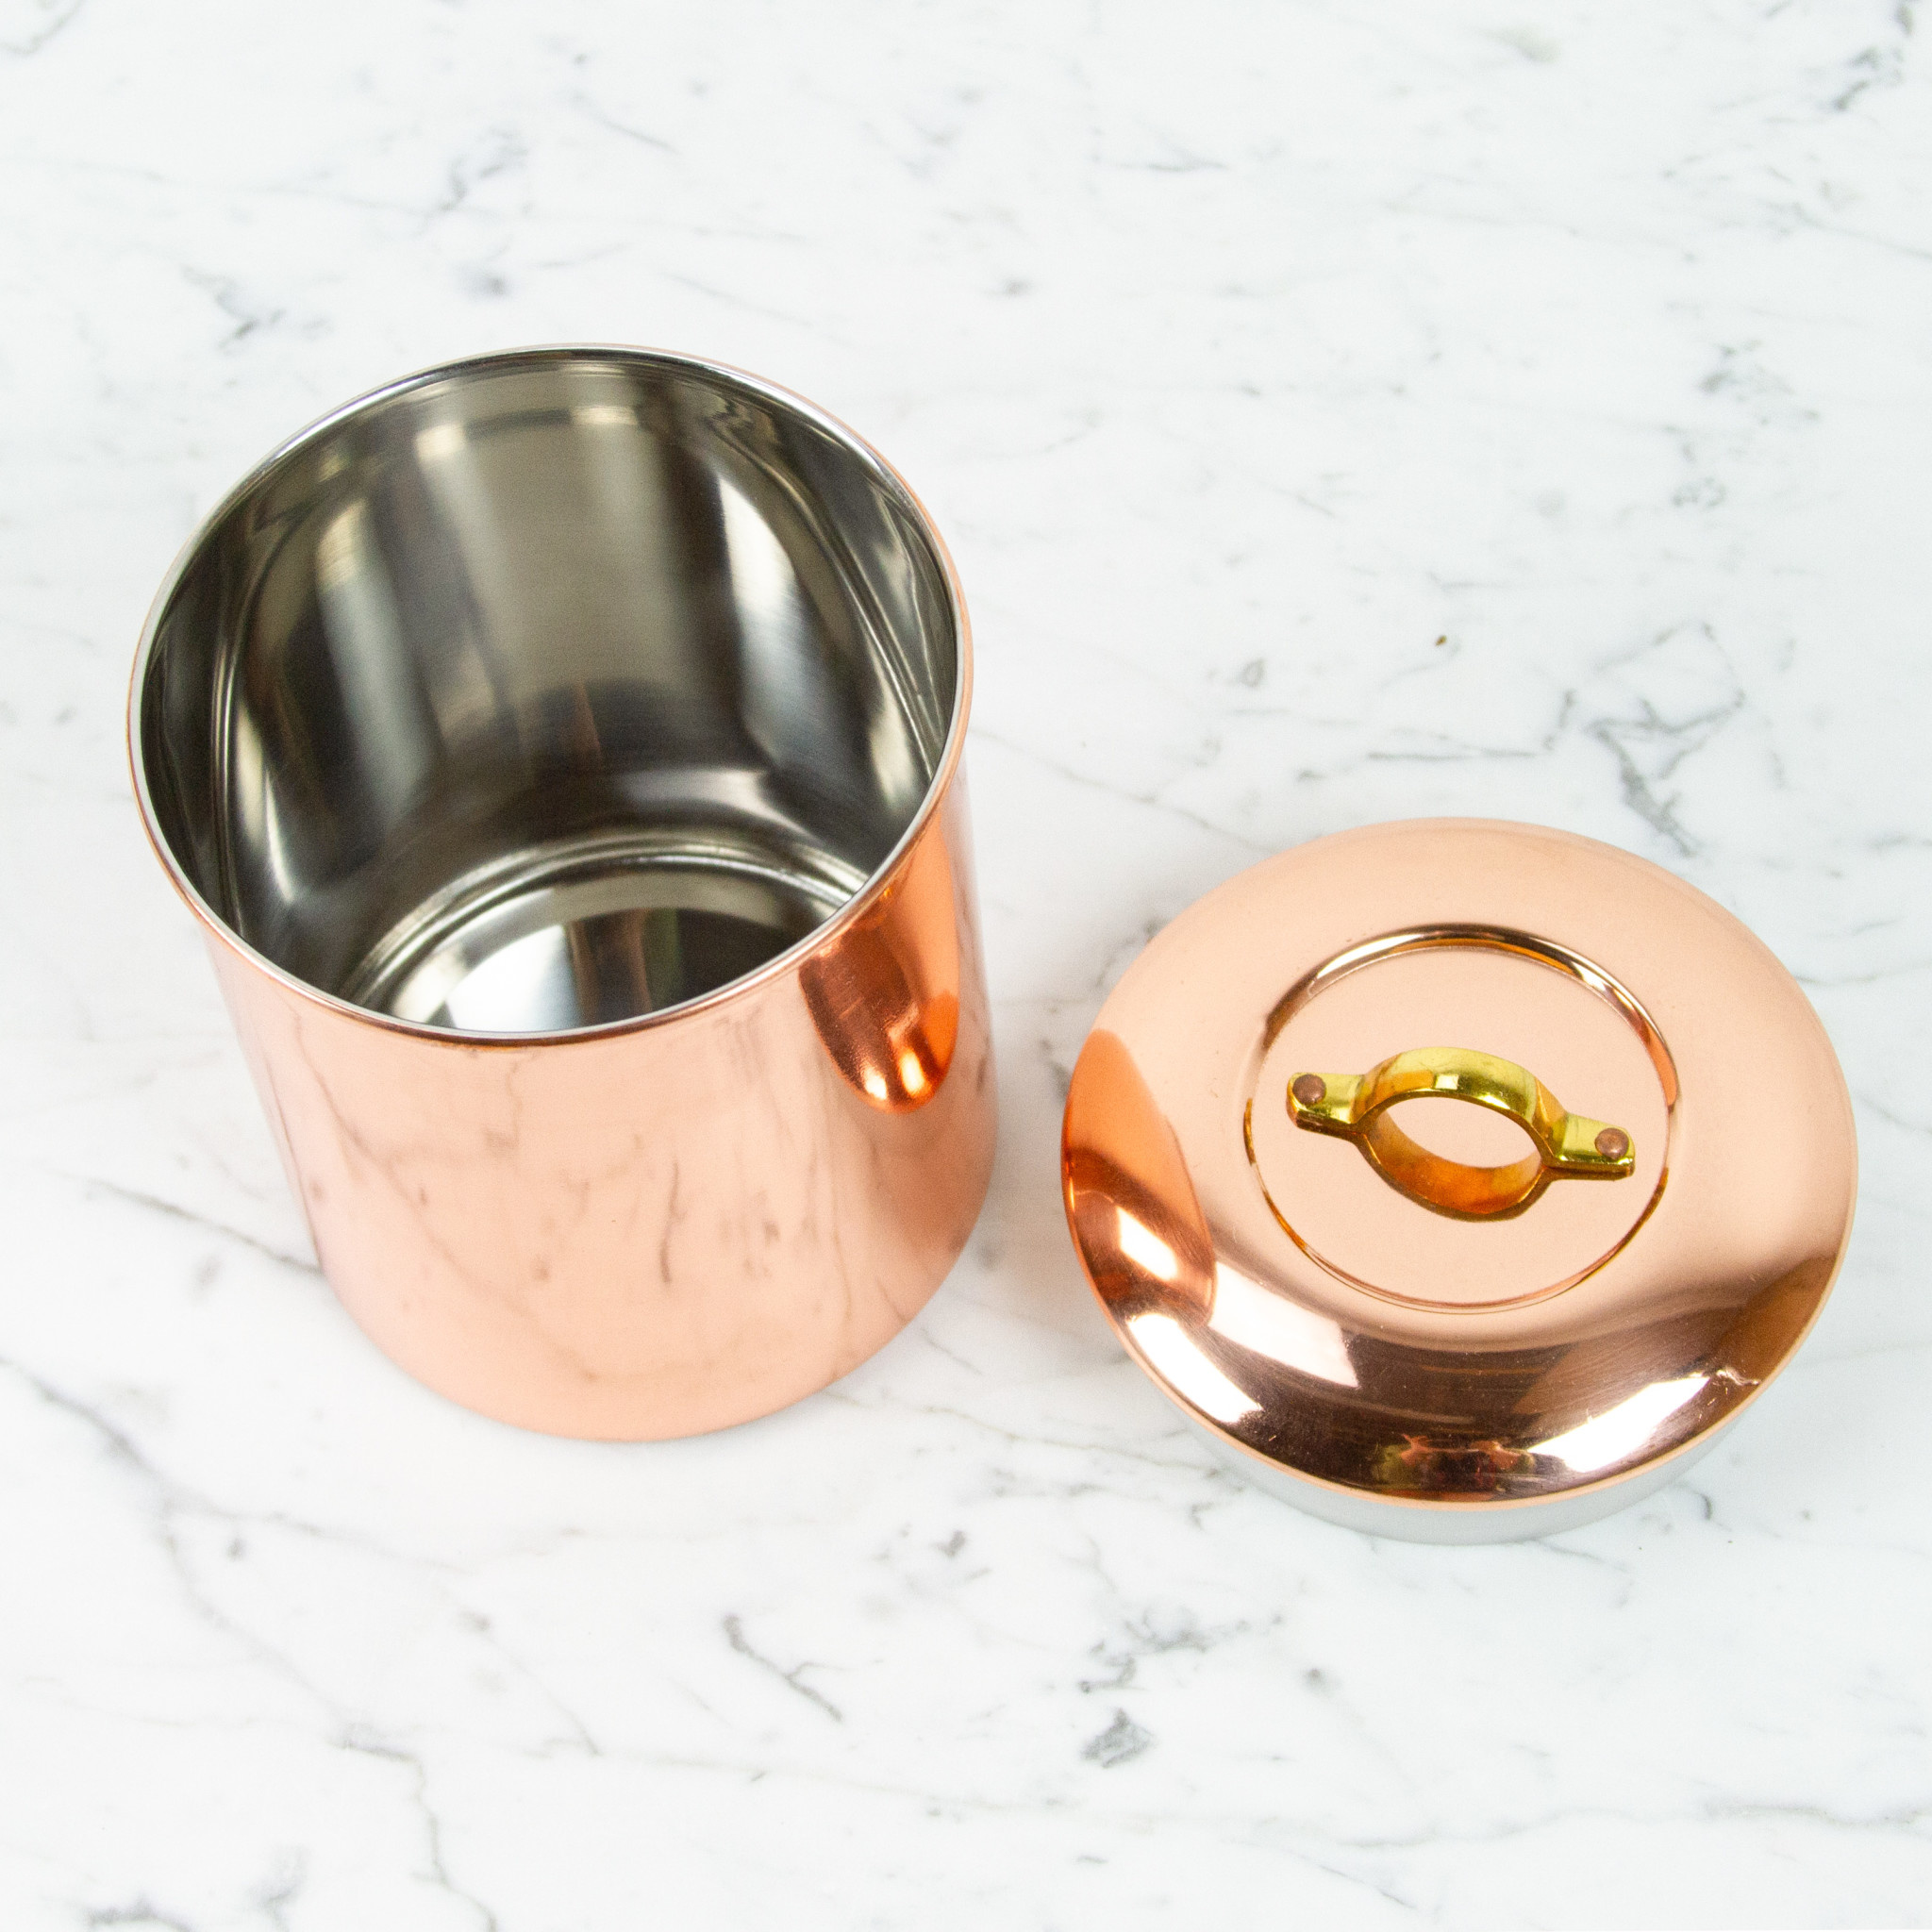 Copper Storage Canister Brass Handle - Extra Small - 4.75"